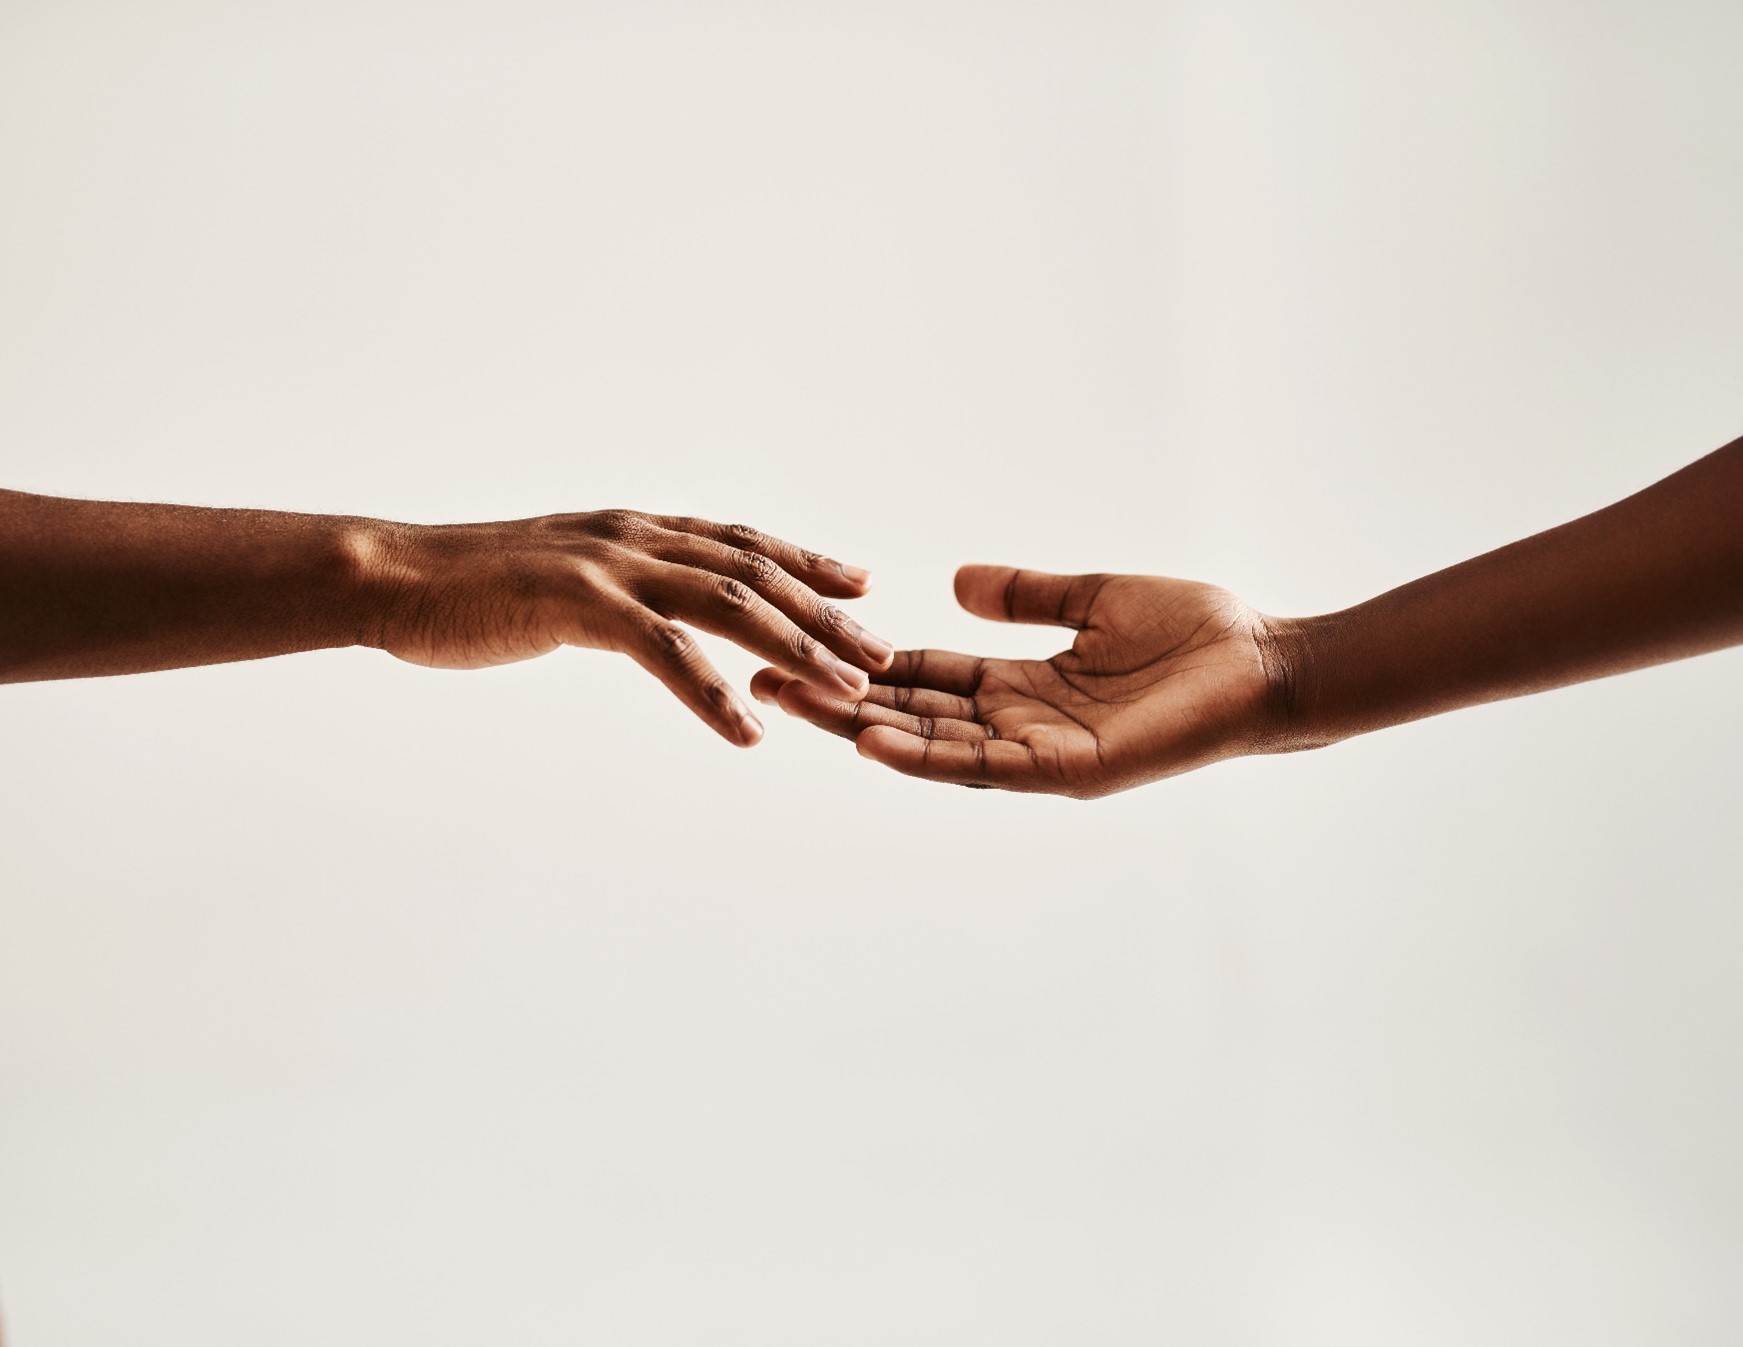 Connecting of hands